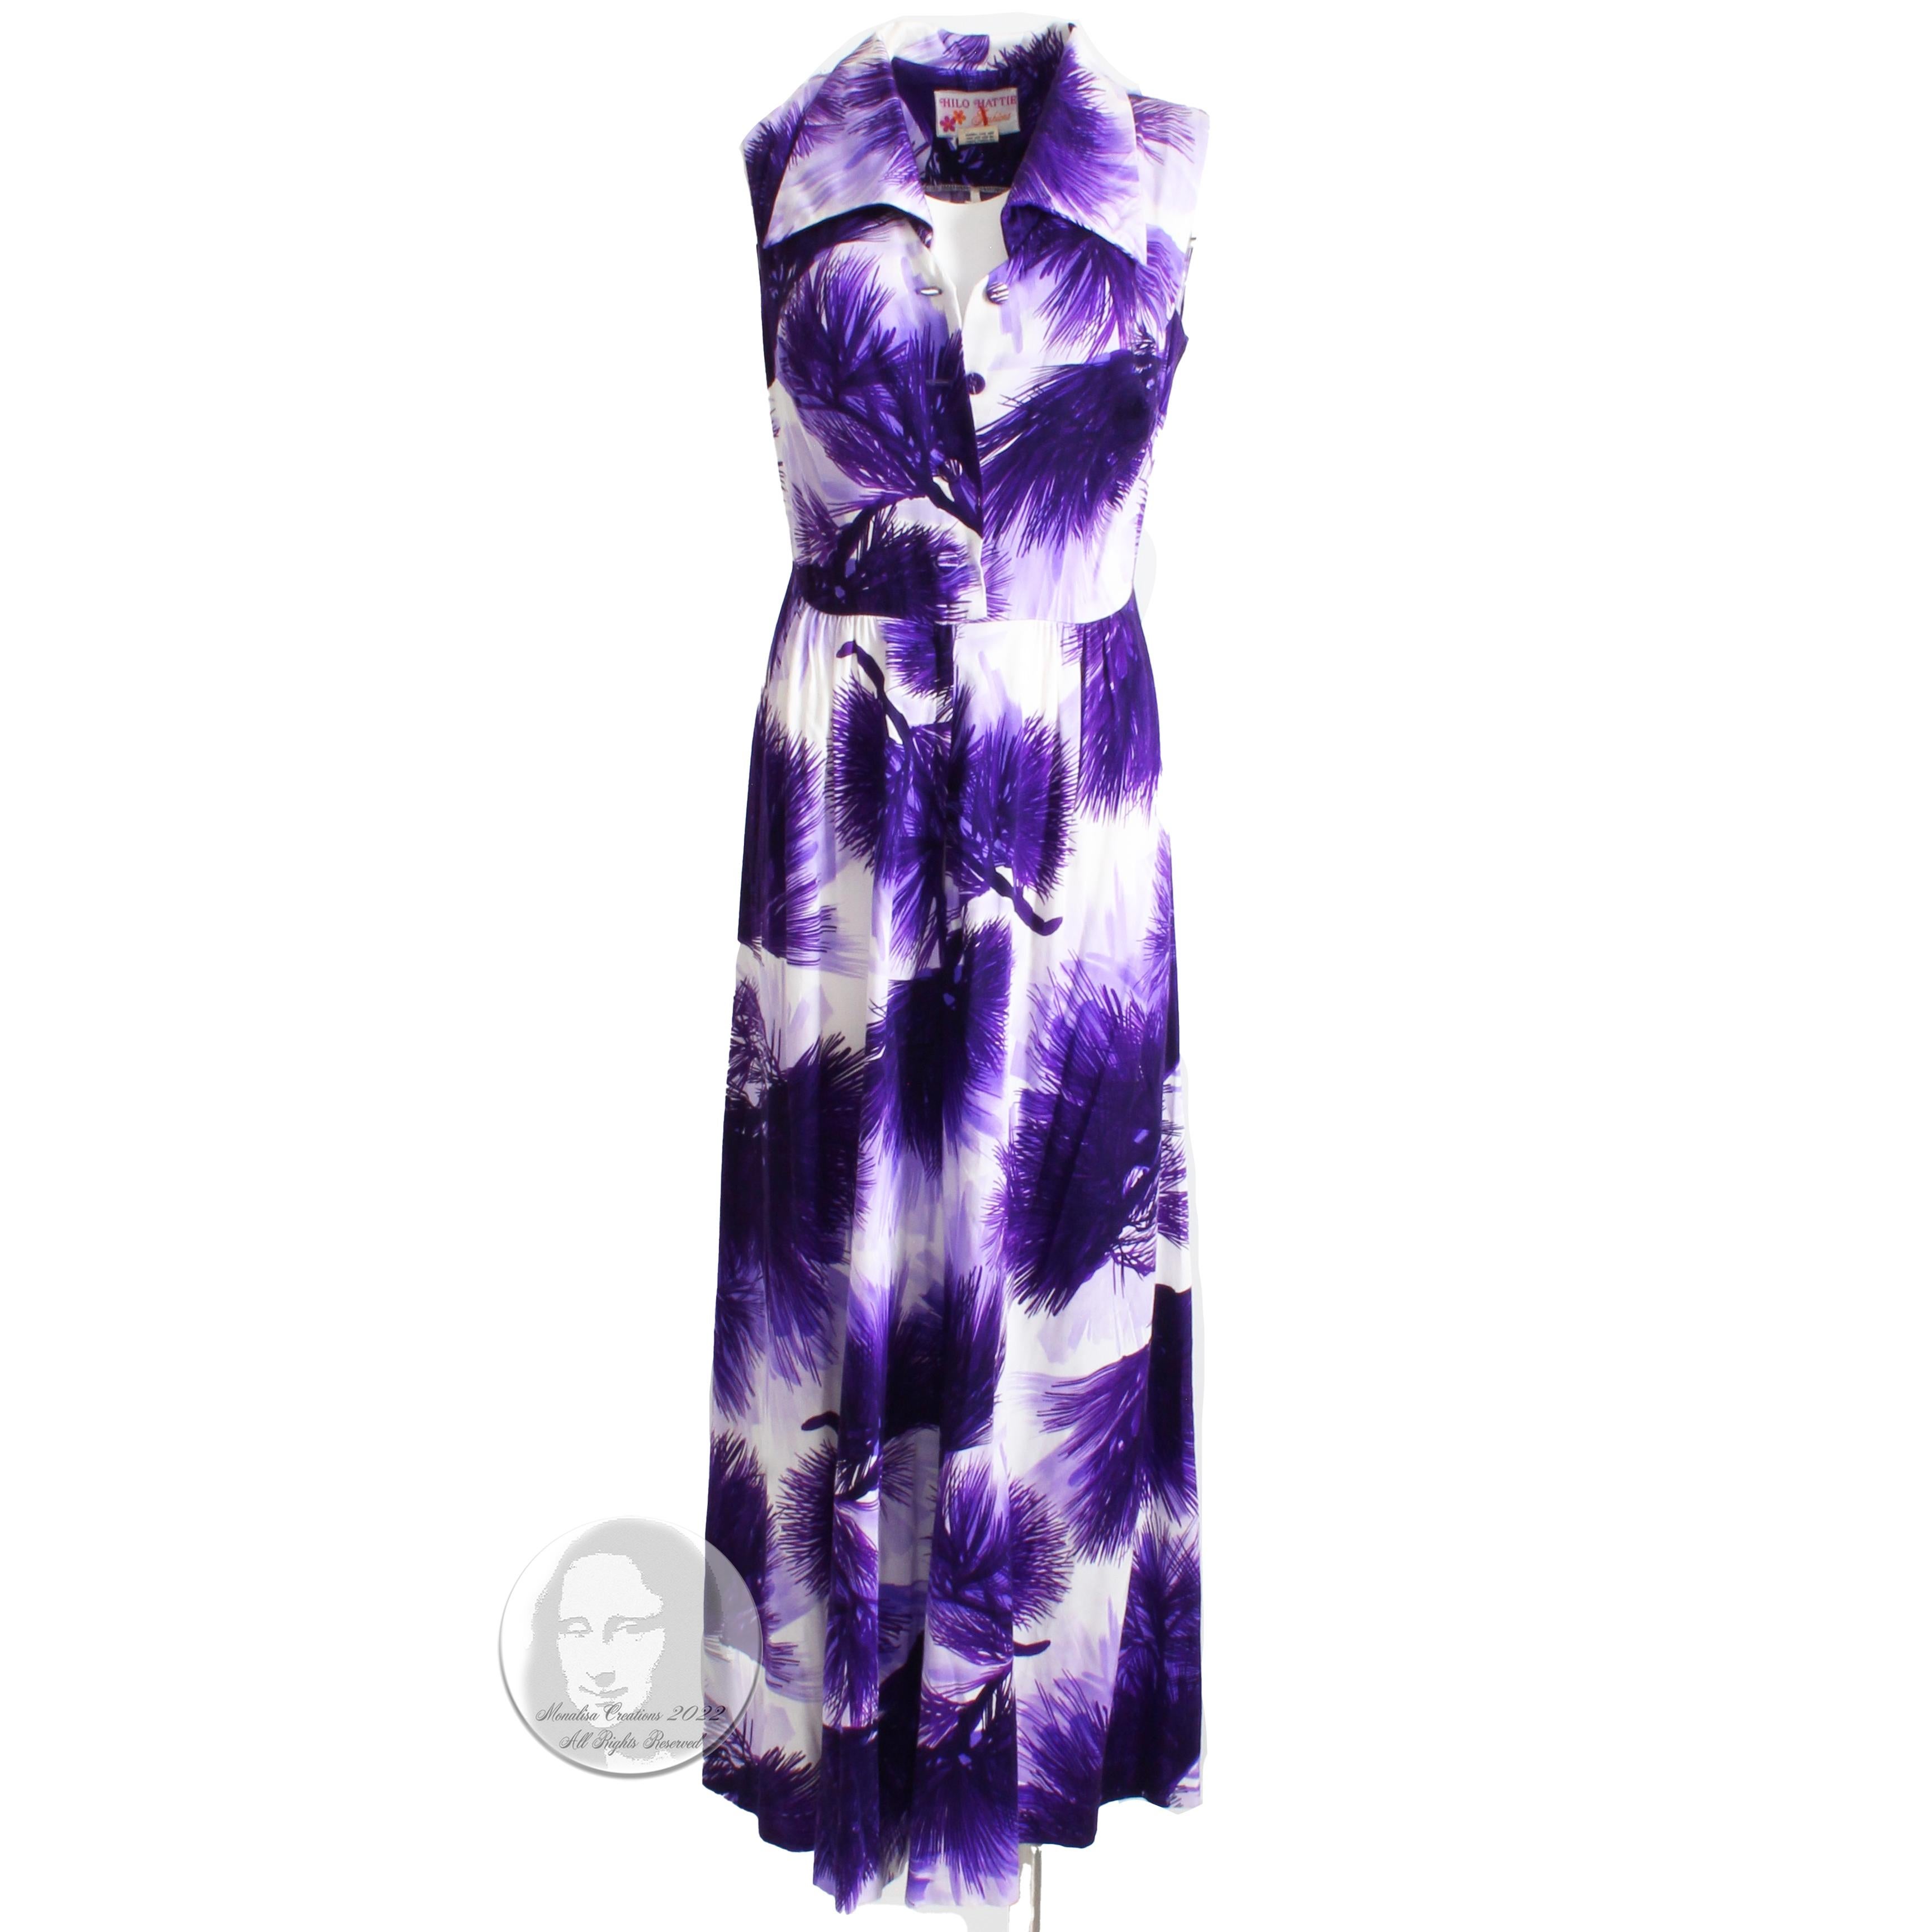 Authentic, preowned, vintage Hilo Hattie Jumpsuit Palazzo Wide Leg, circa 1970. Unlined/poly blend/washable. Super rare and fabulous wide leg or palazzo jumpsuit with gorgeous purple and white floral print. Great for your summer jaunts and pool